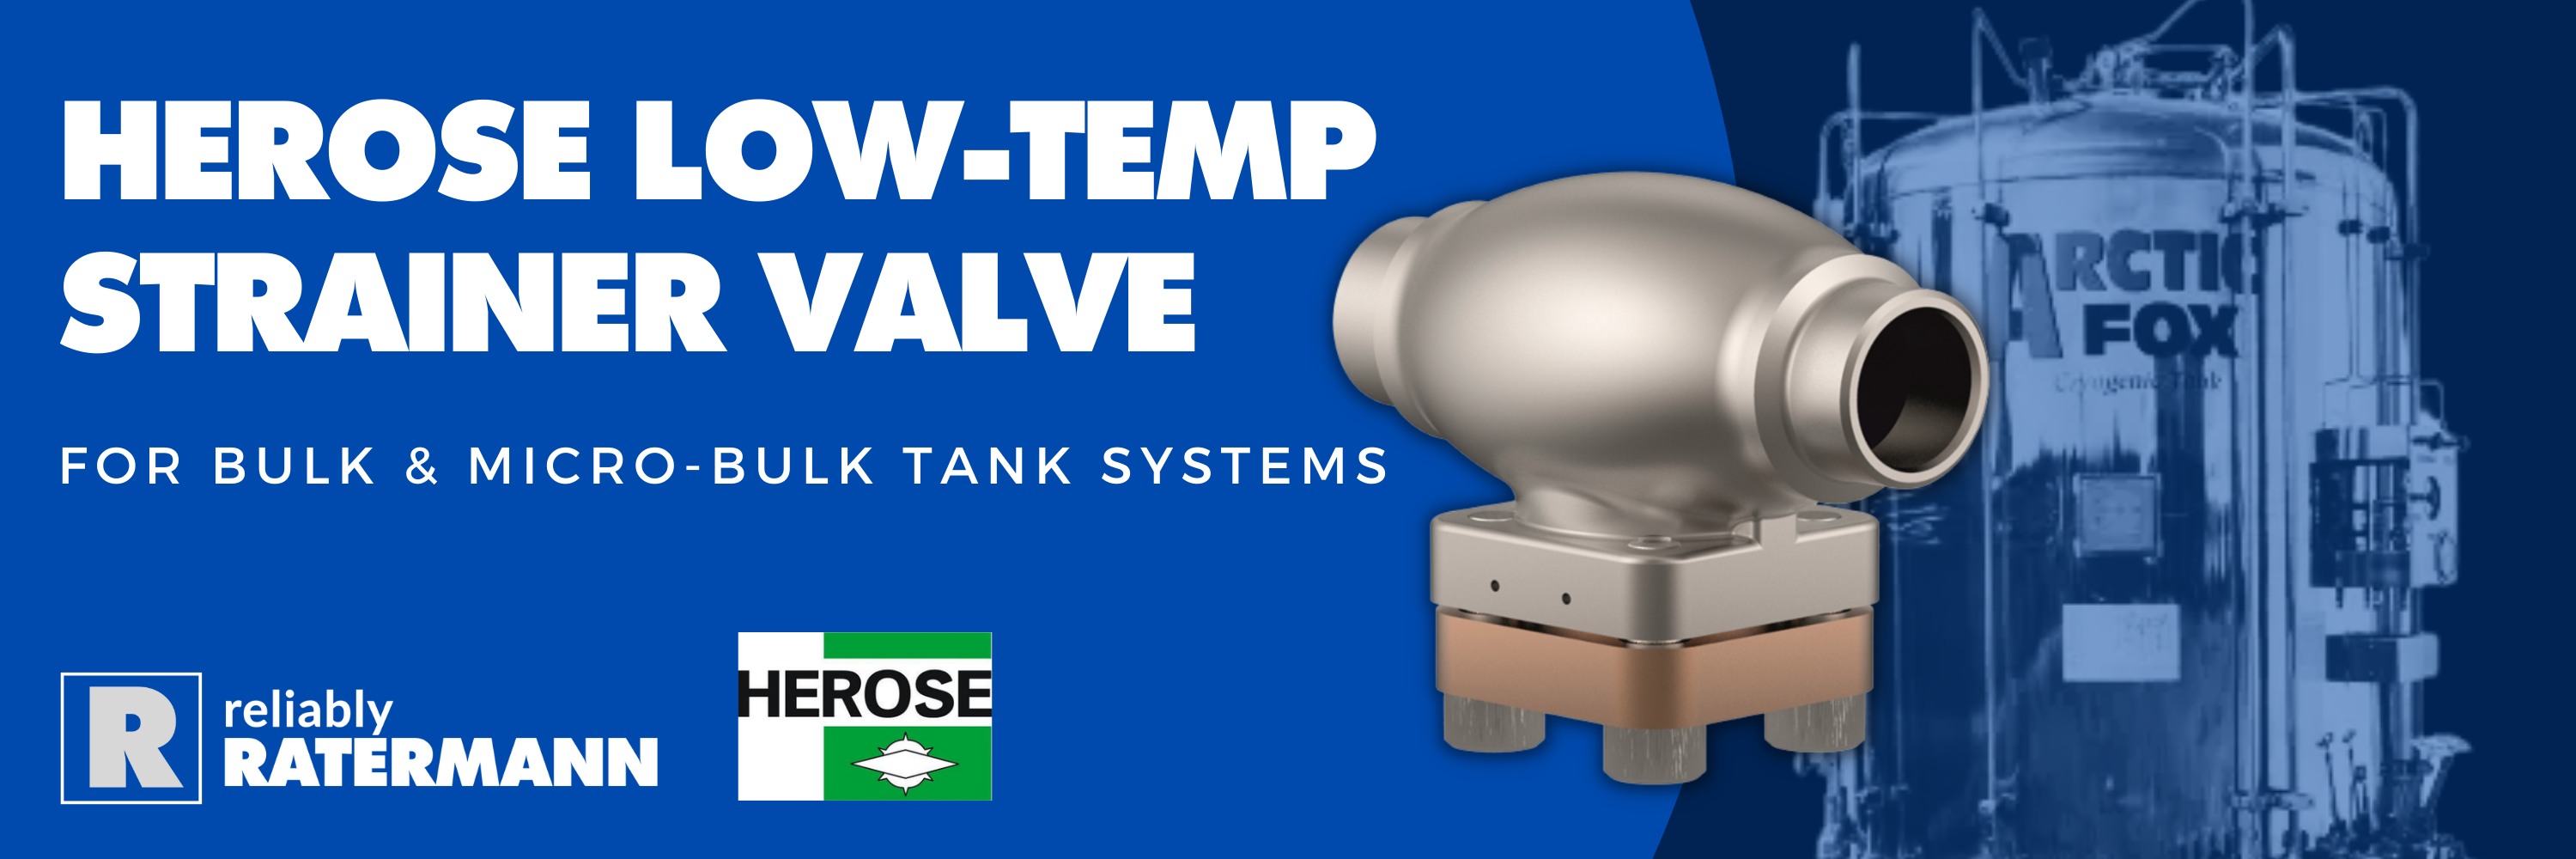 Save the Day with the Herose Low-Temperature Strainer Valve